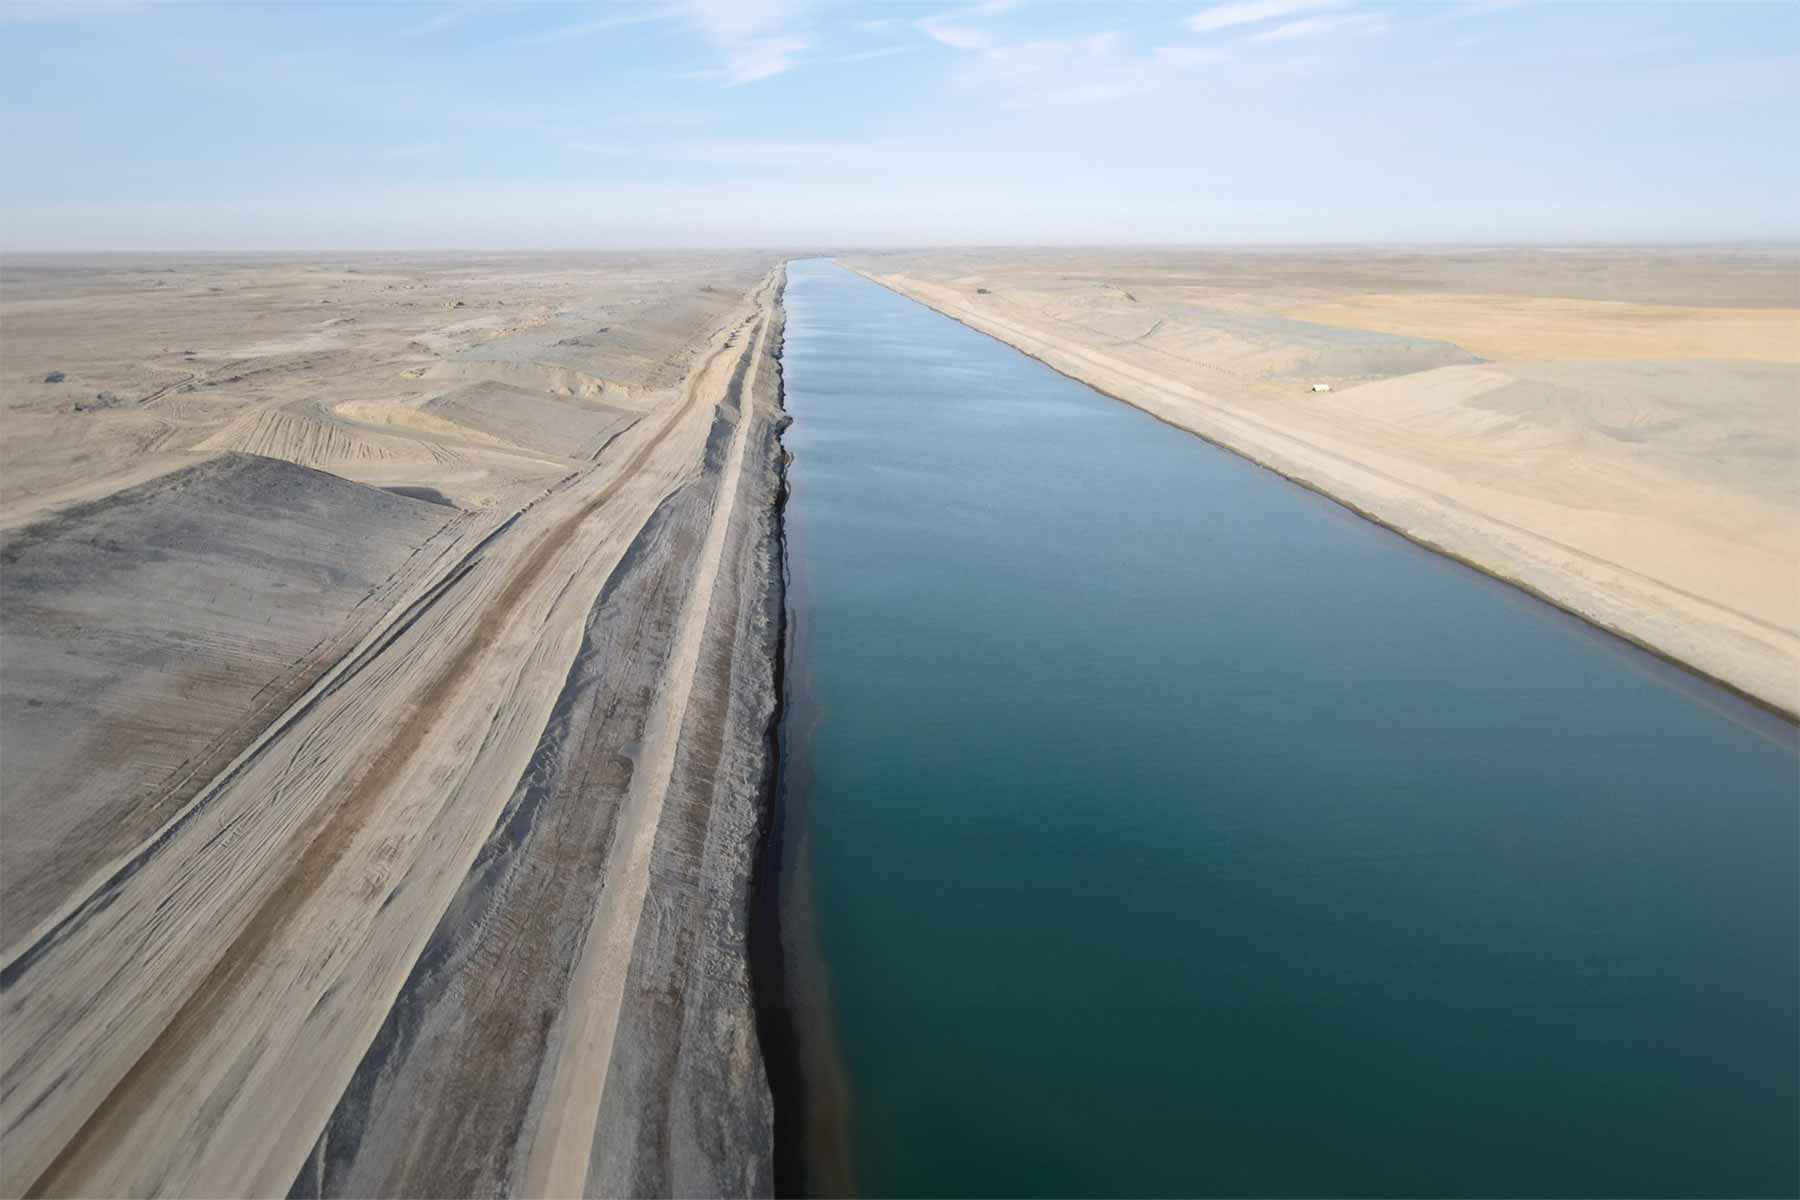 View of Qosh Tepa, an irrigation canal, which will direct the water from the Amu Darya river to Afghanistan's arid northern region. © Afghanistan's deputy minister of economic development